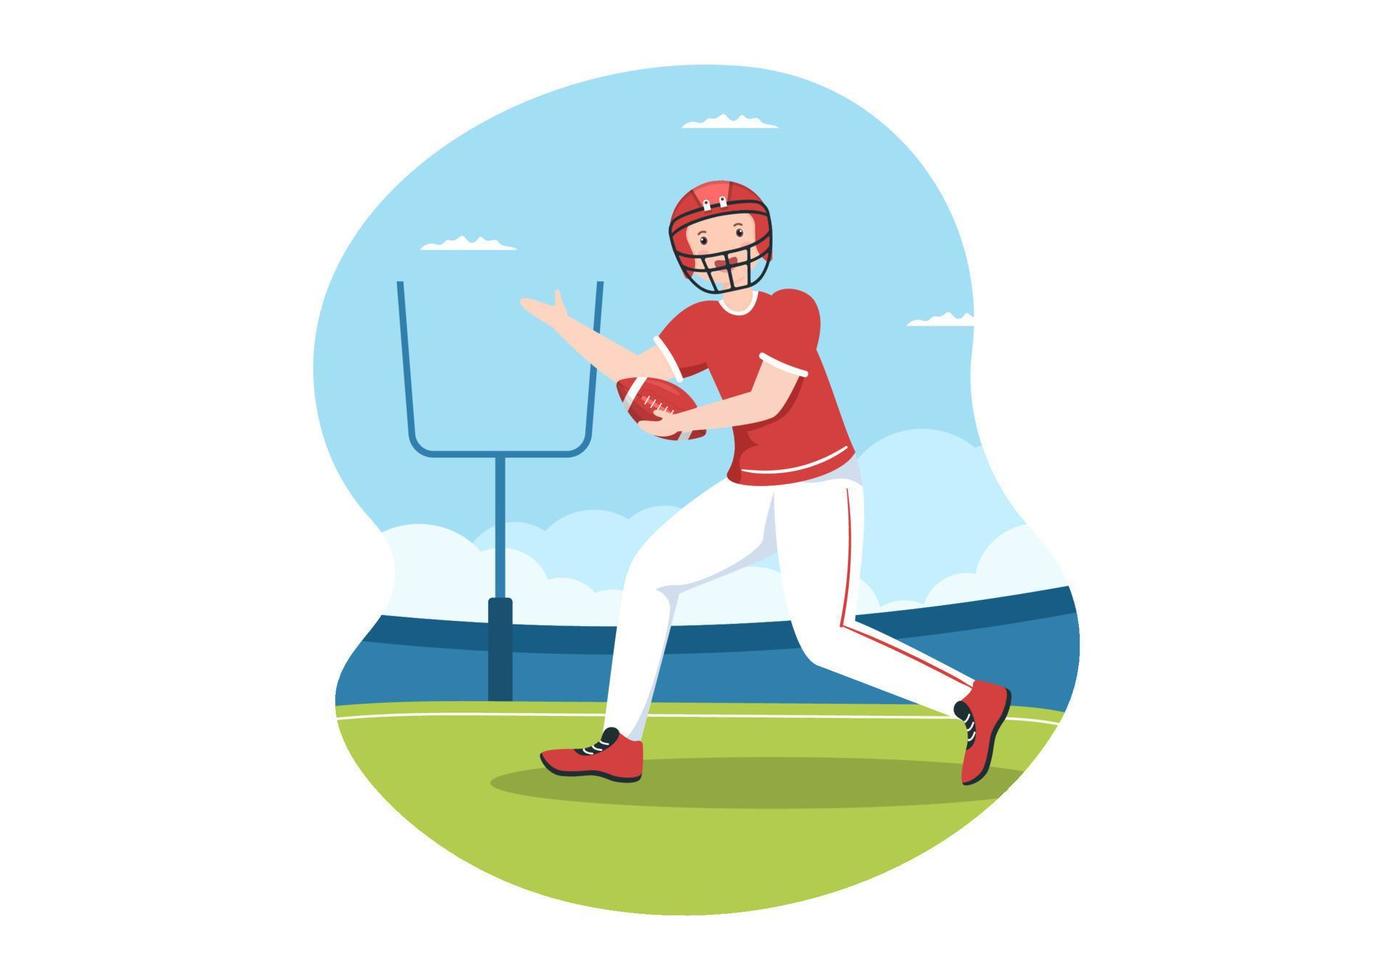 American Football Sports Player with The Game uses an Oval Shaped Ball and is Brown at Field Hand Drawn Cartoon Flat Illustration vector